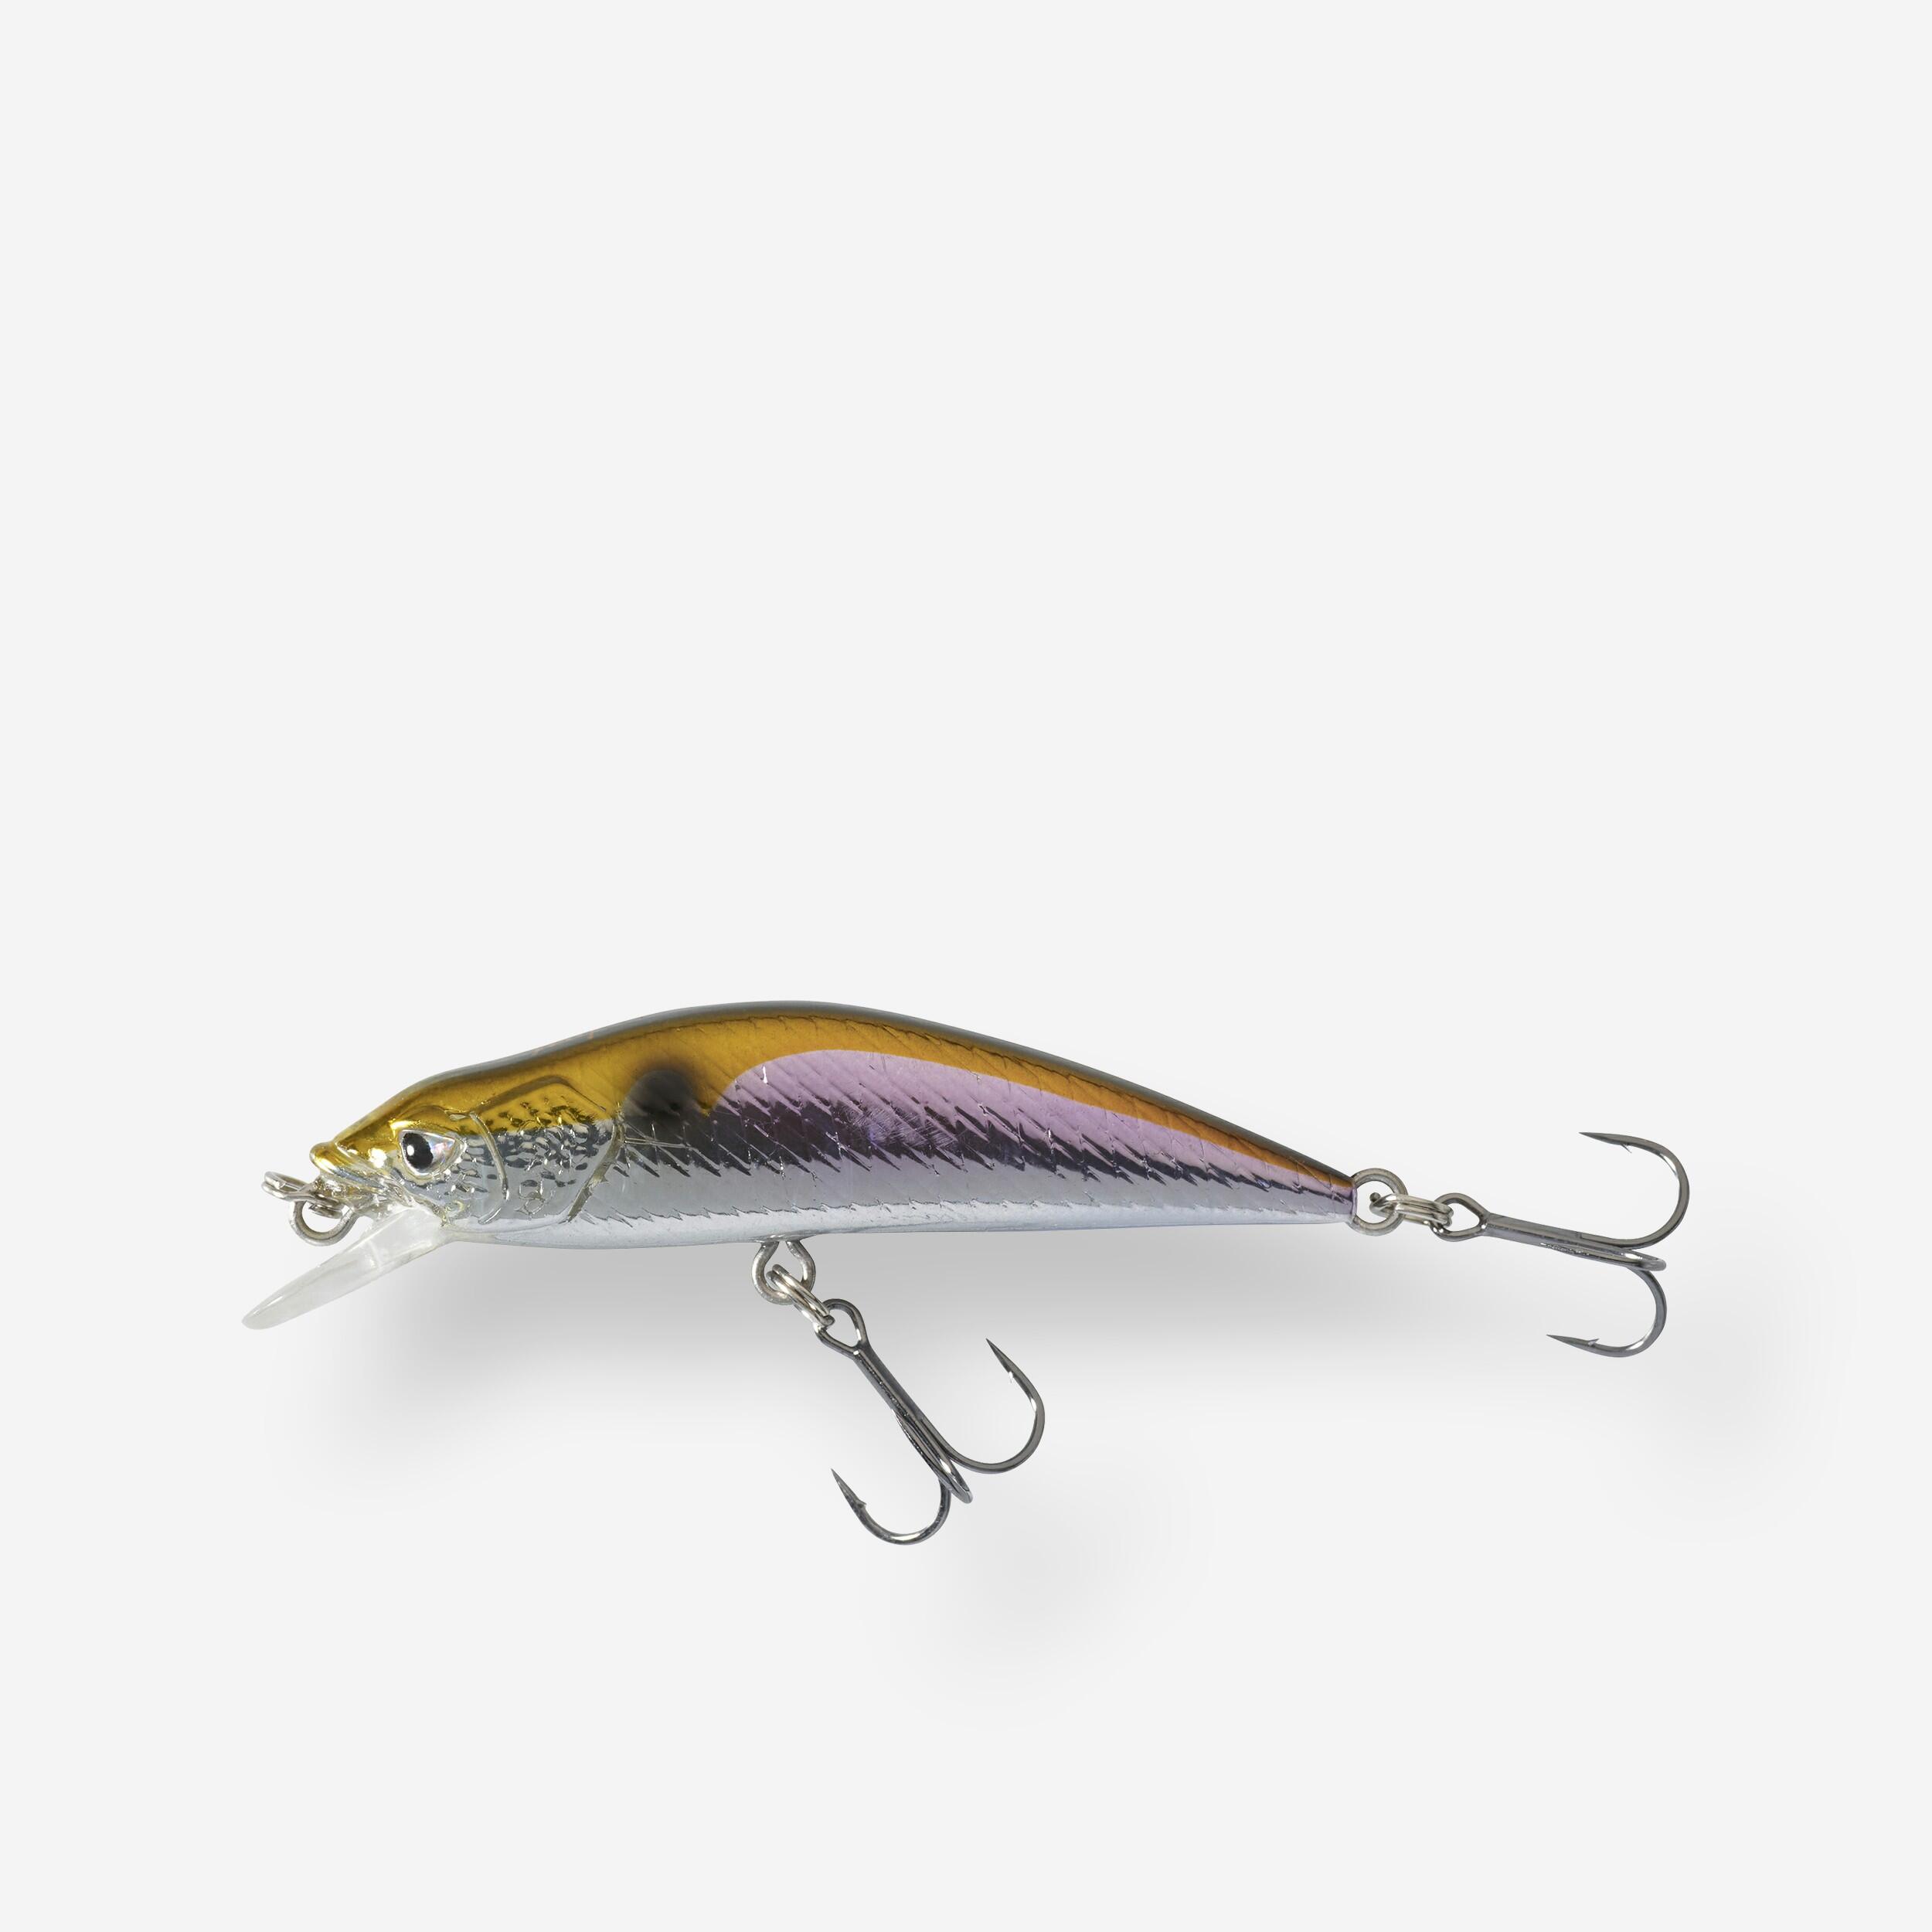 MINNOW HARD LURE FOR TROUT WXM  MNWFS US 50 FRY 1/4